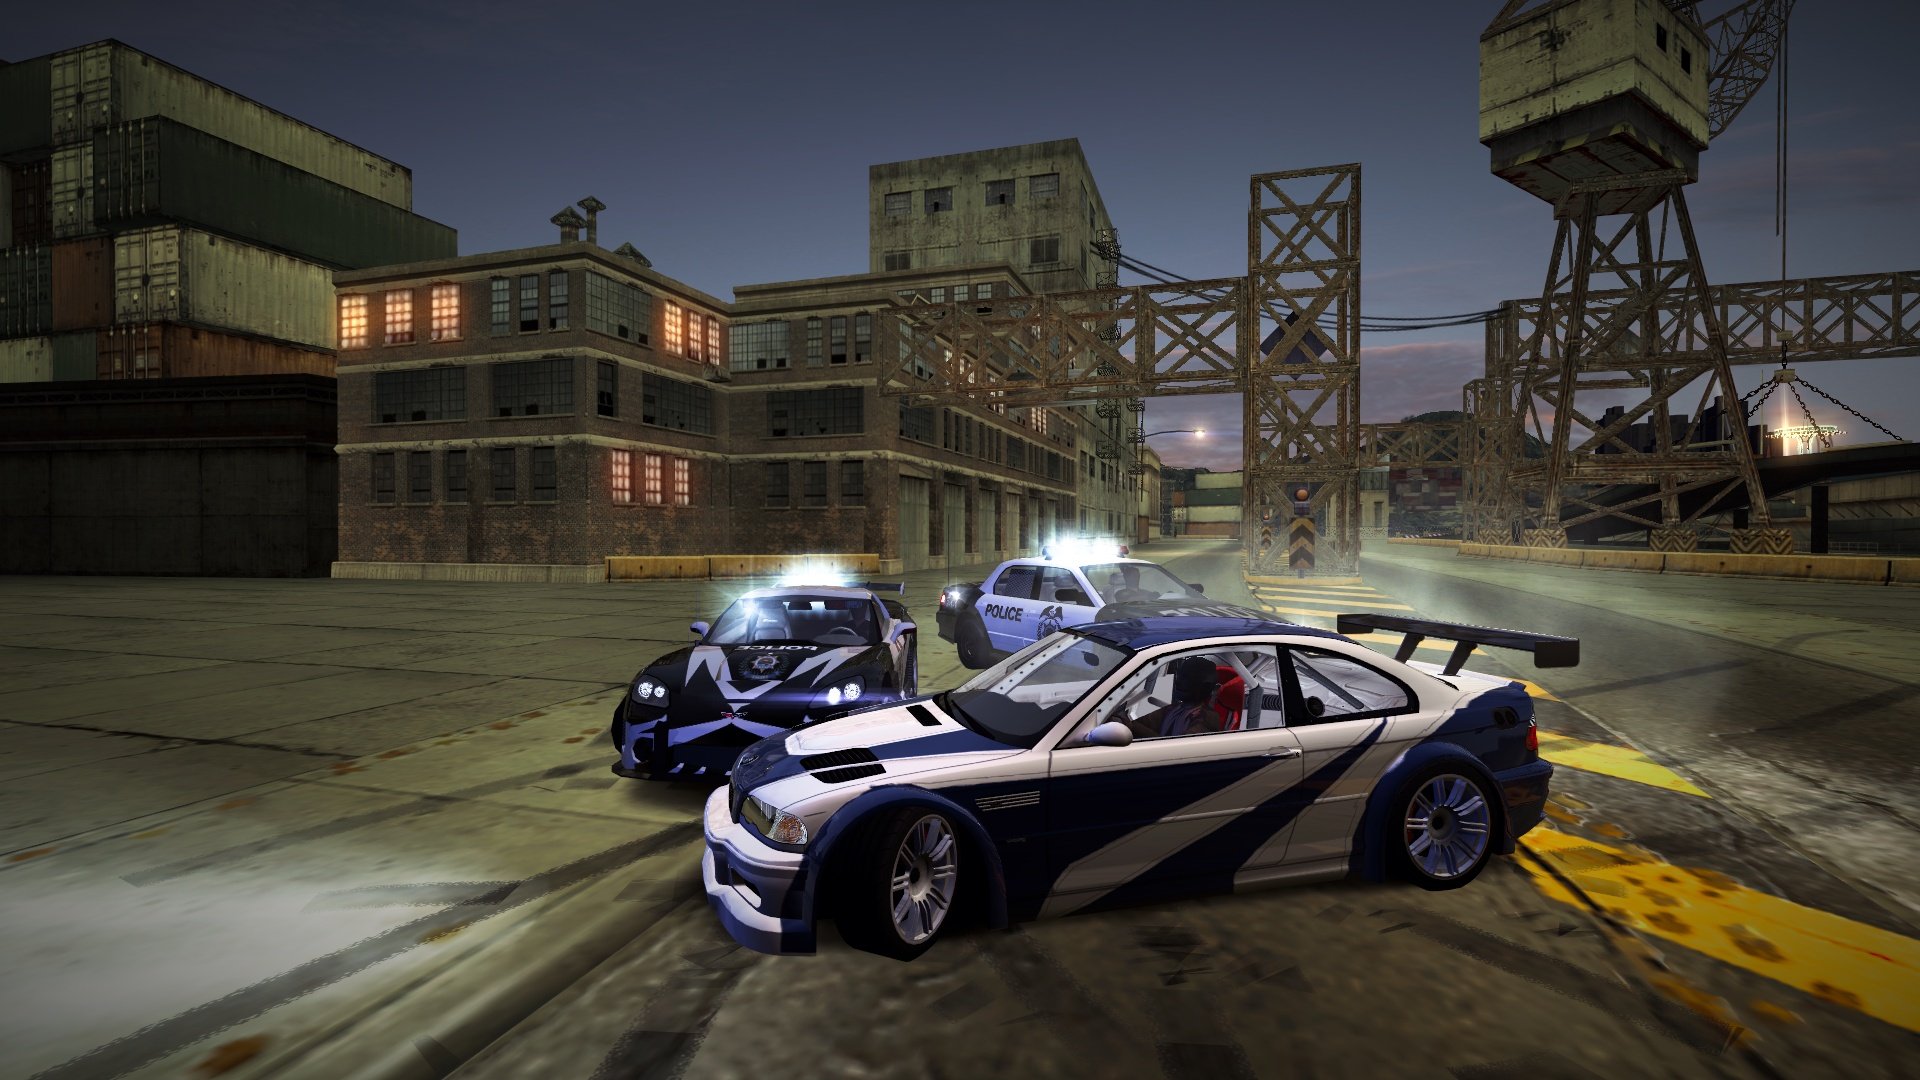 Pc game mods. NFS most wanted 2005 город. Новый NFS most wanted 2005. Гонки NFS most wanted. NFS MW 2005.